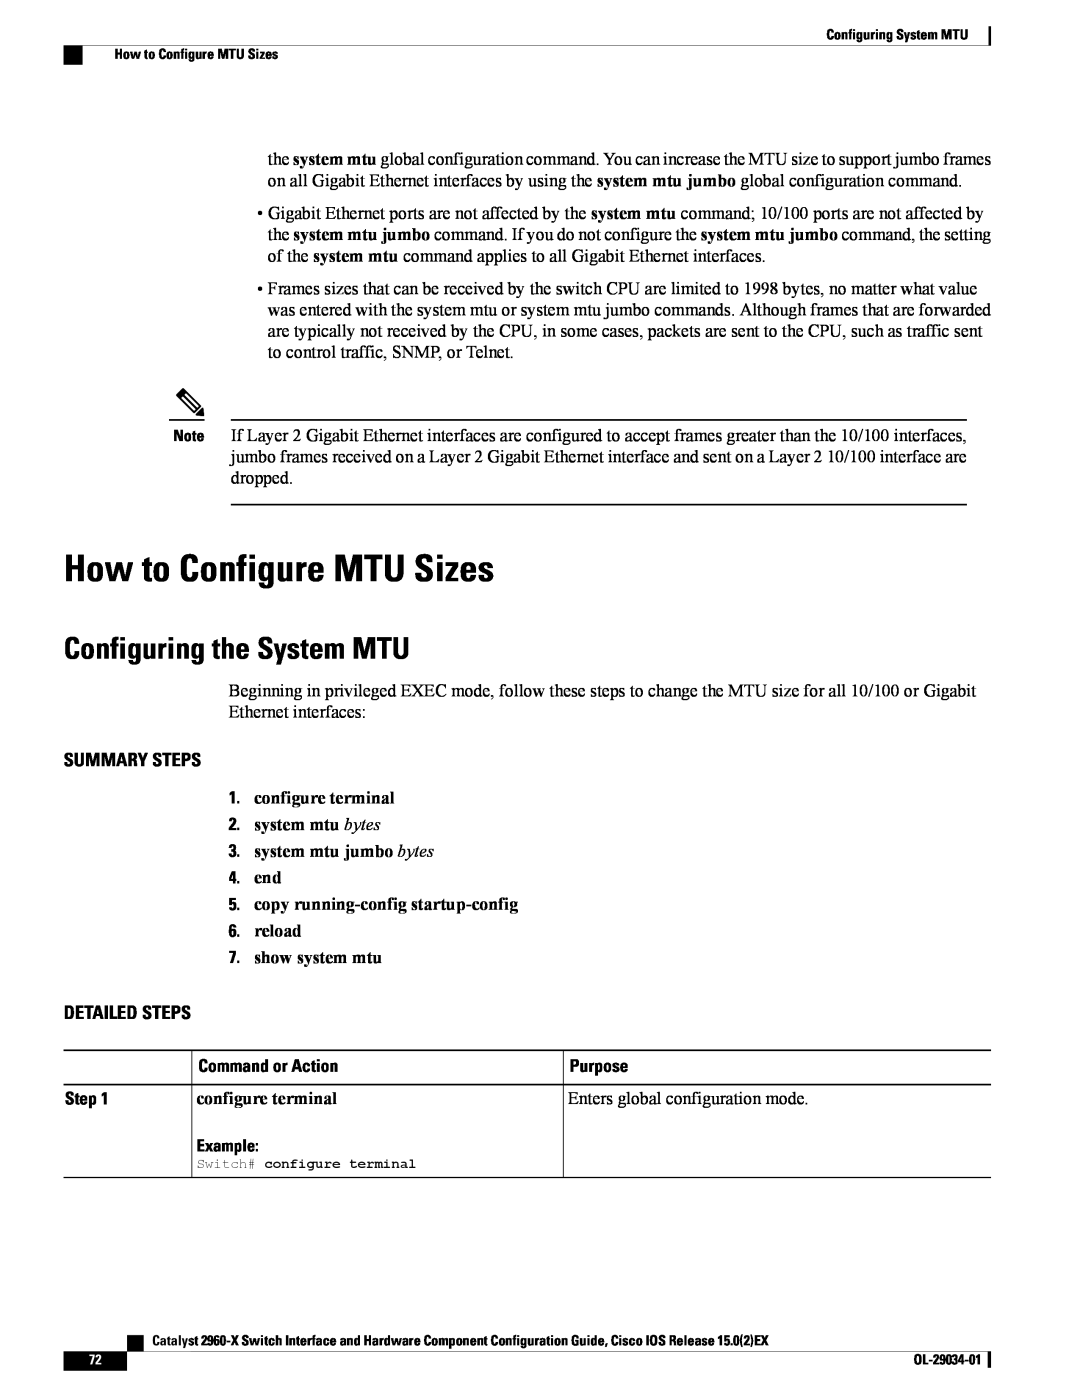 Cisco Systems WSC2960X48TDL manual How to Configure MTU Sizes, Configuring the System MTU, show system mtu, Summary Steps 